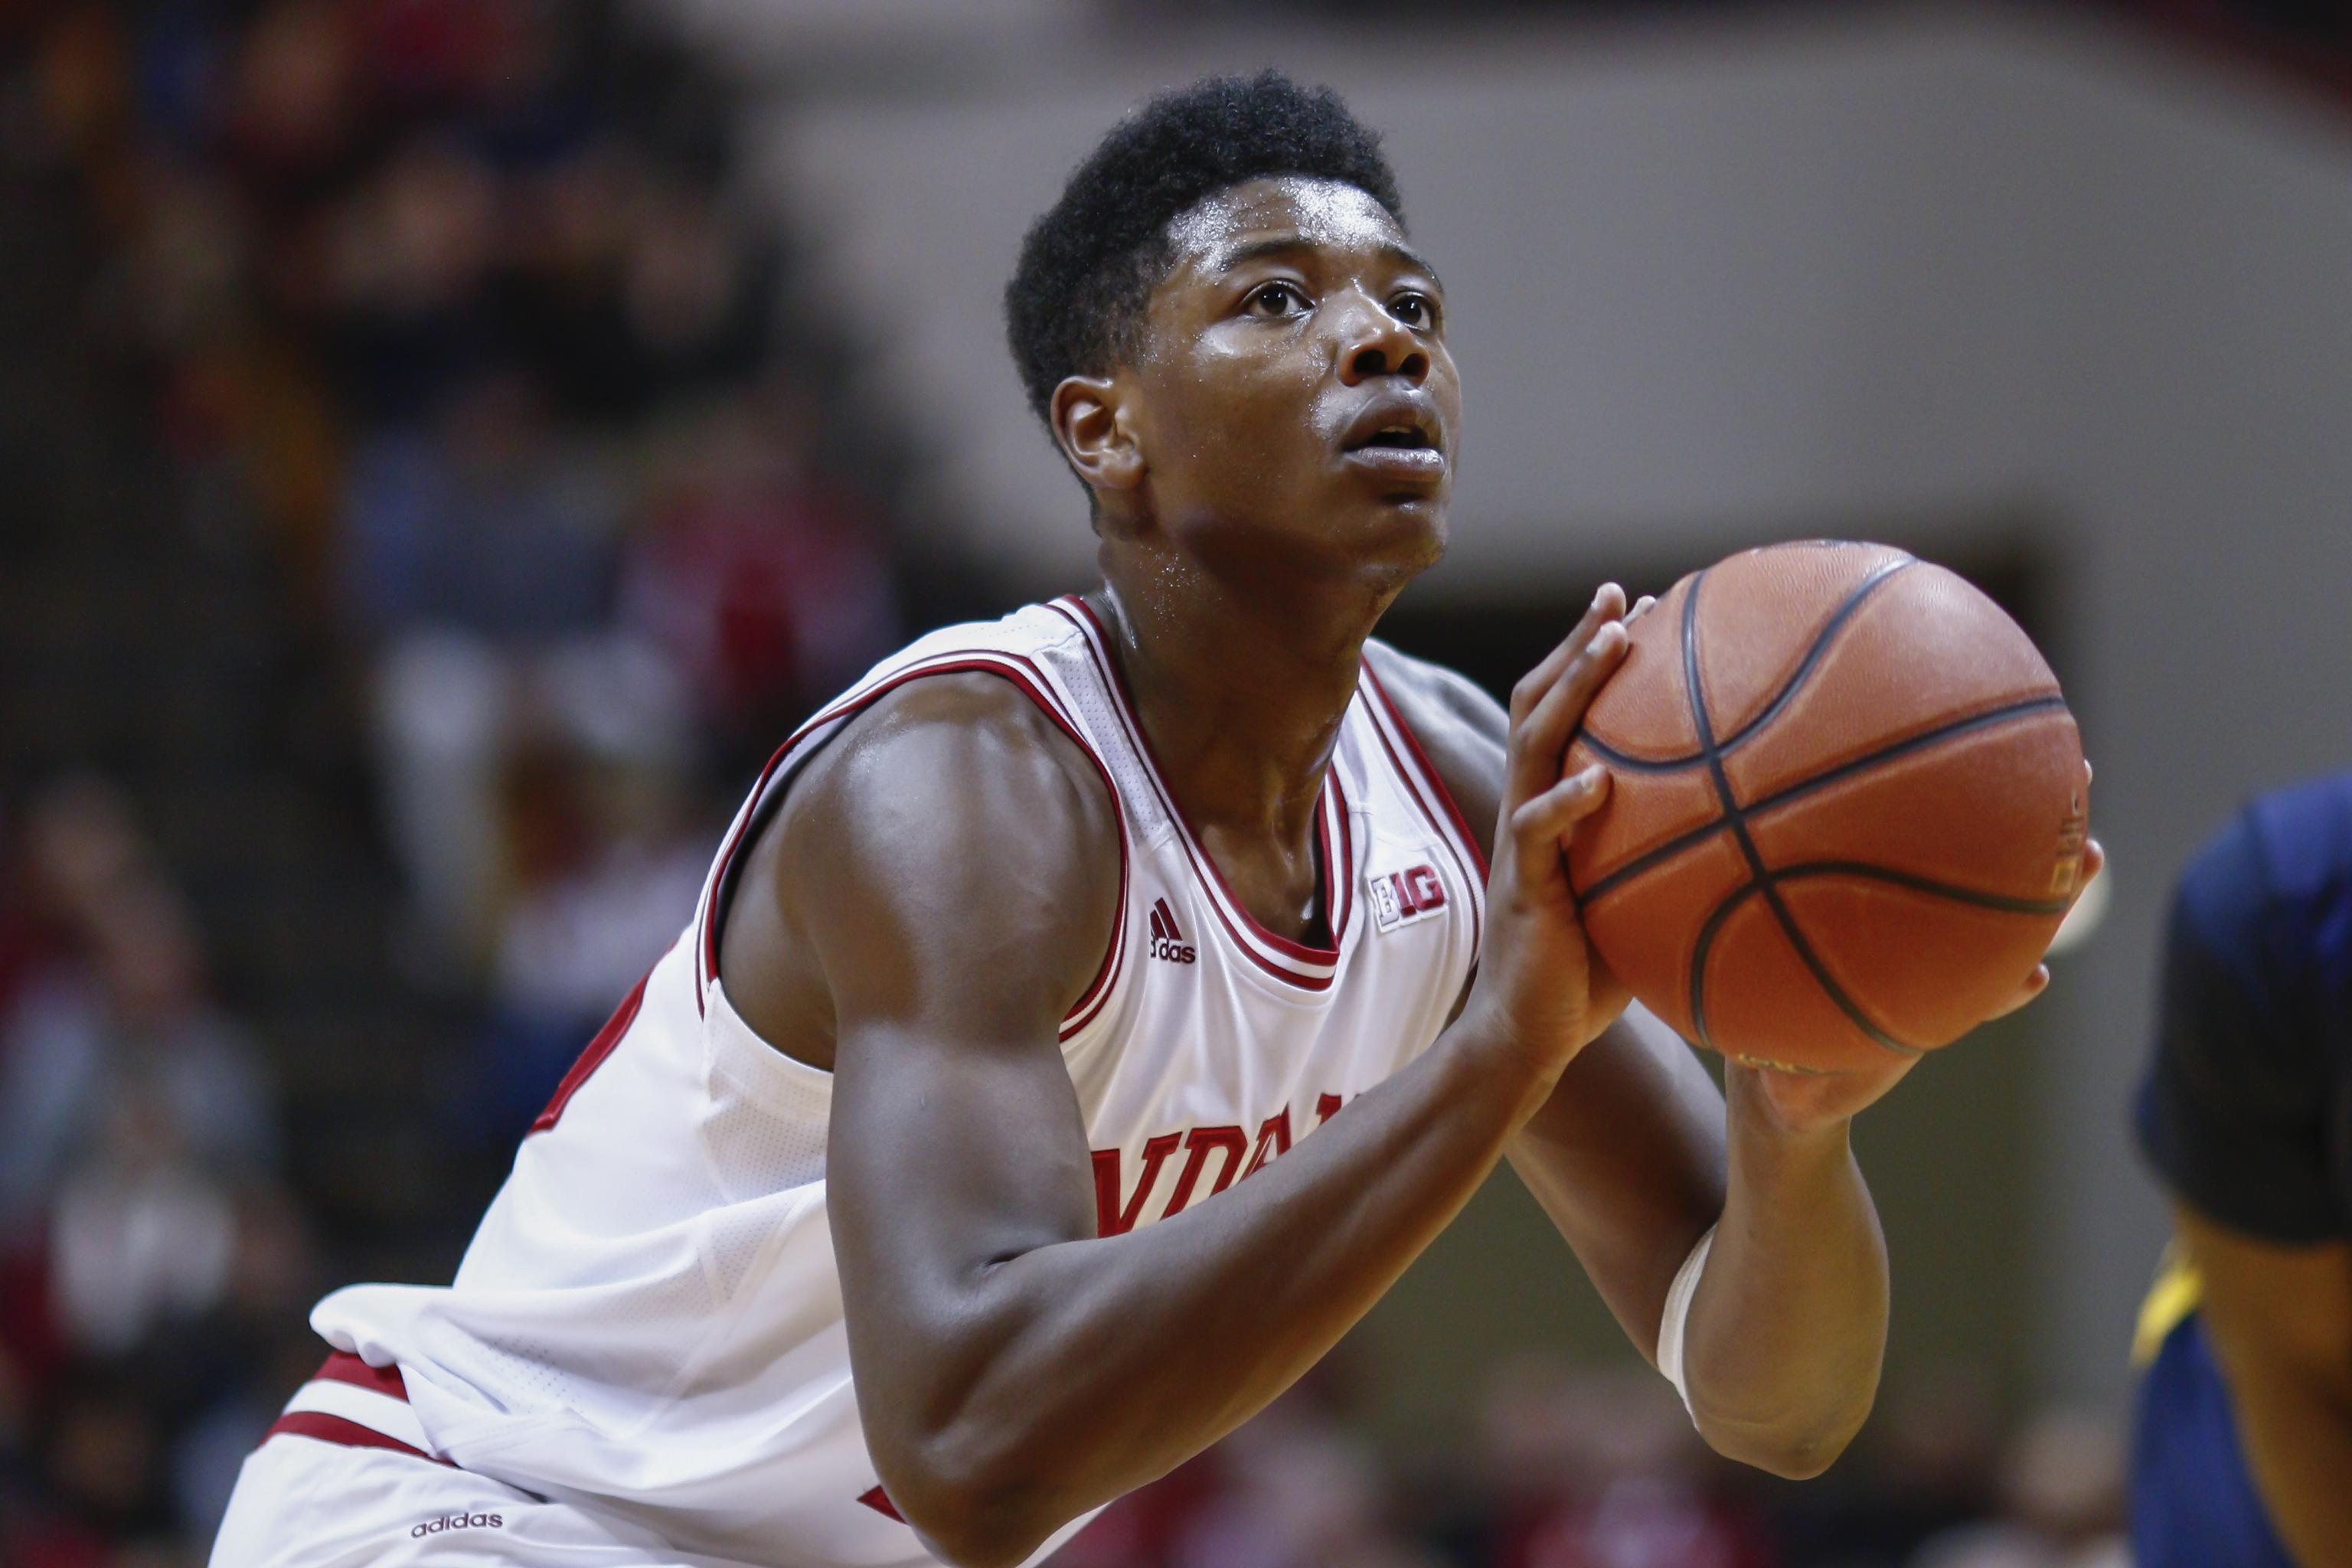 2 Indiana players cited for alcohol possession, including 5-star recruit Thomas  Bryant 